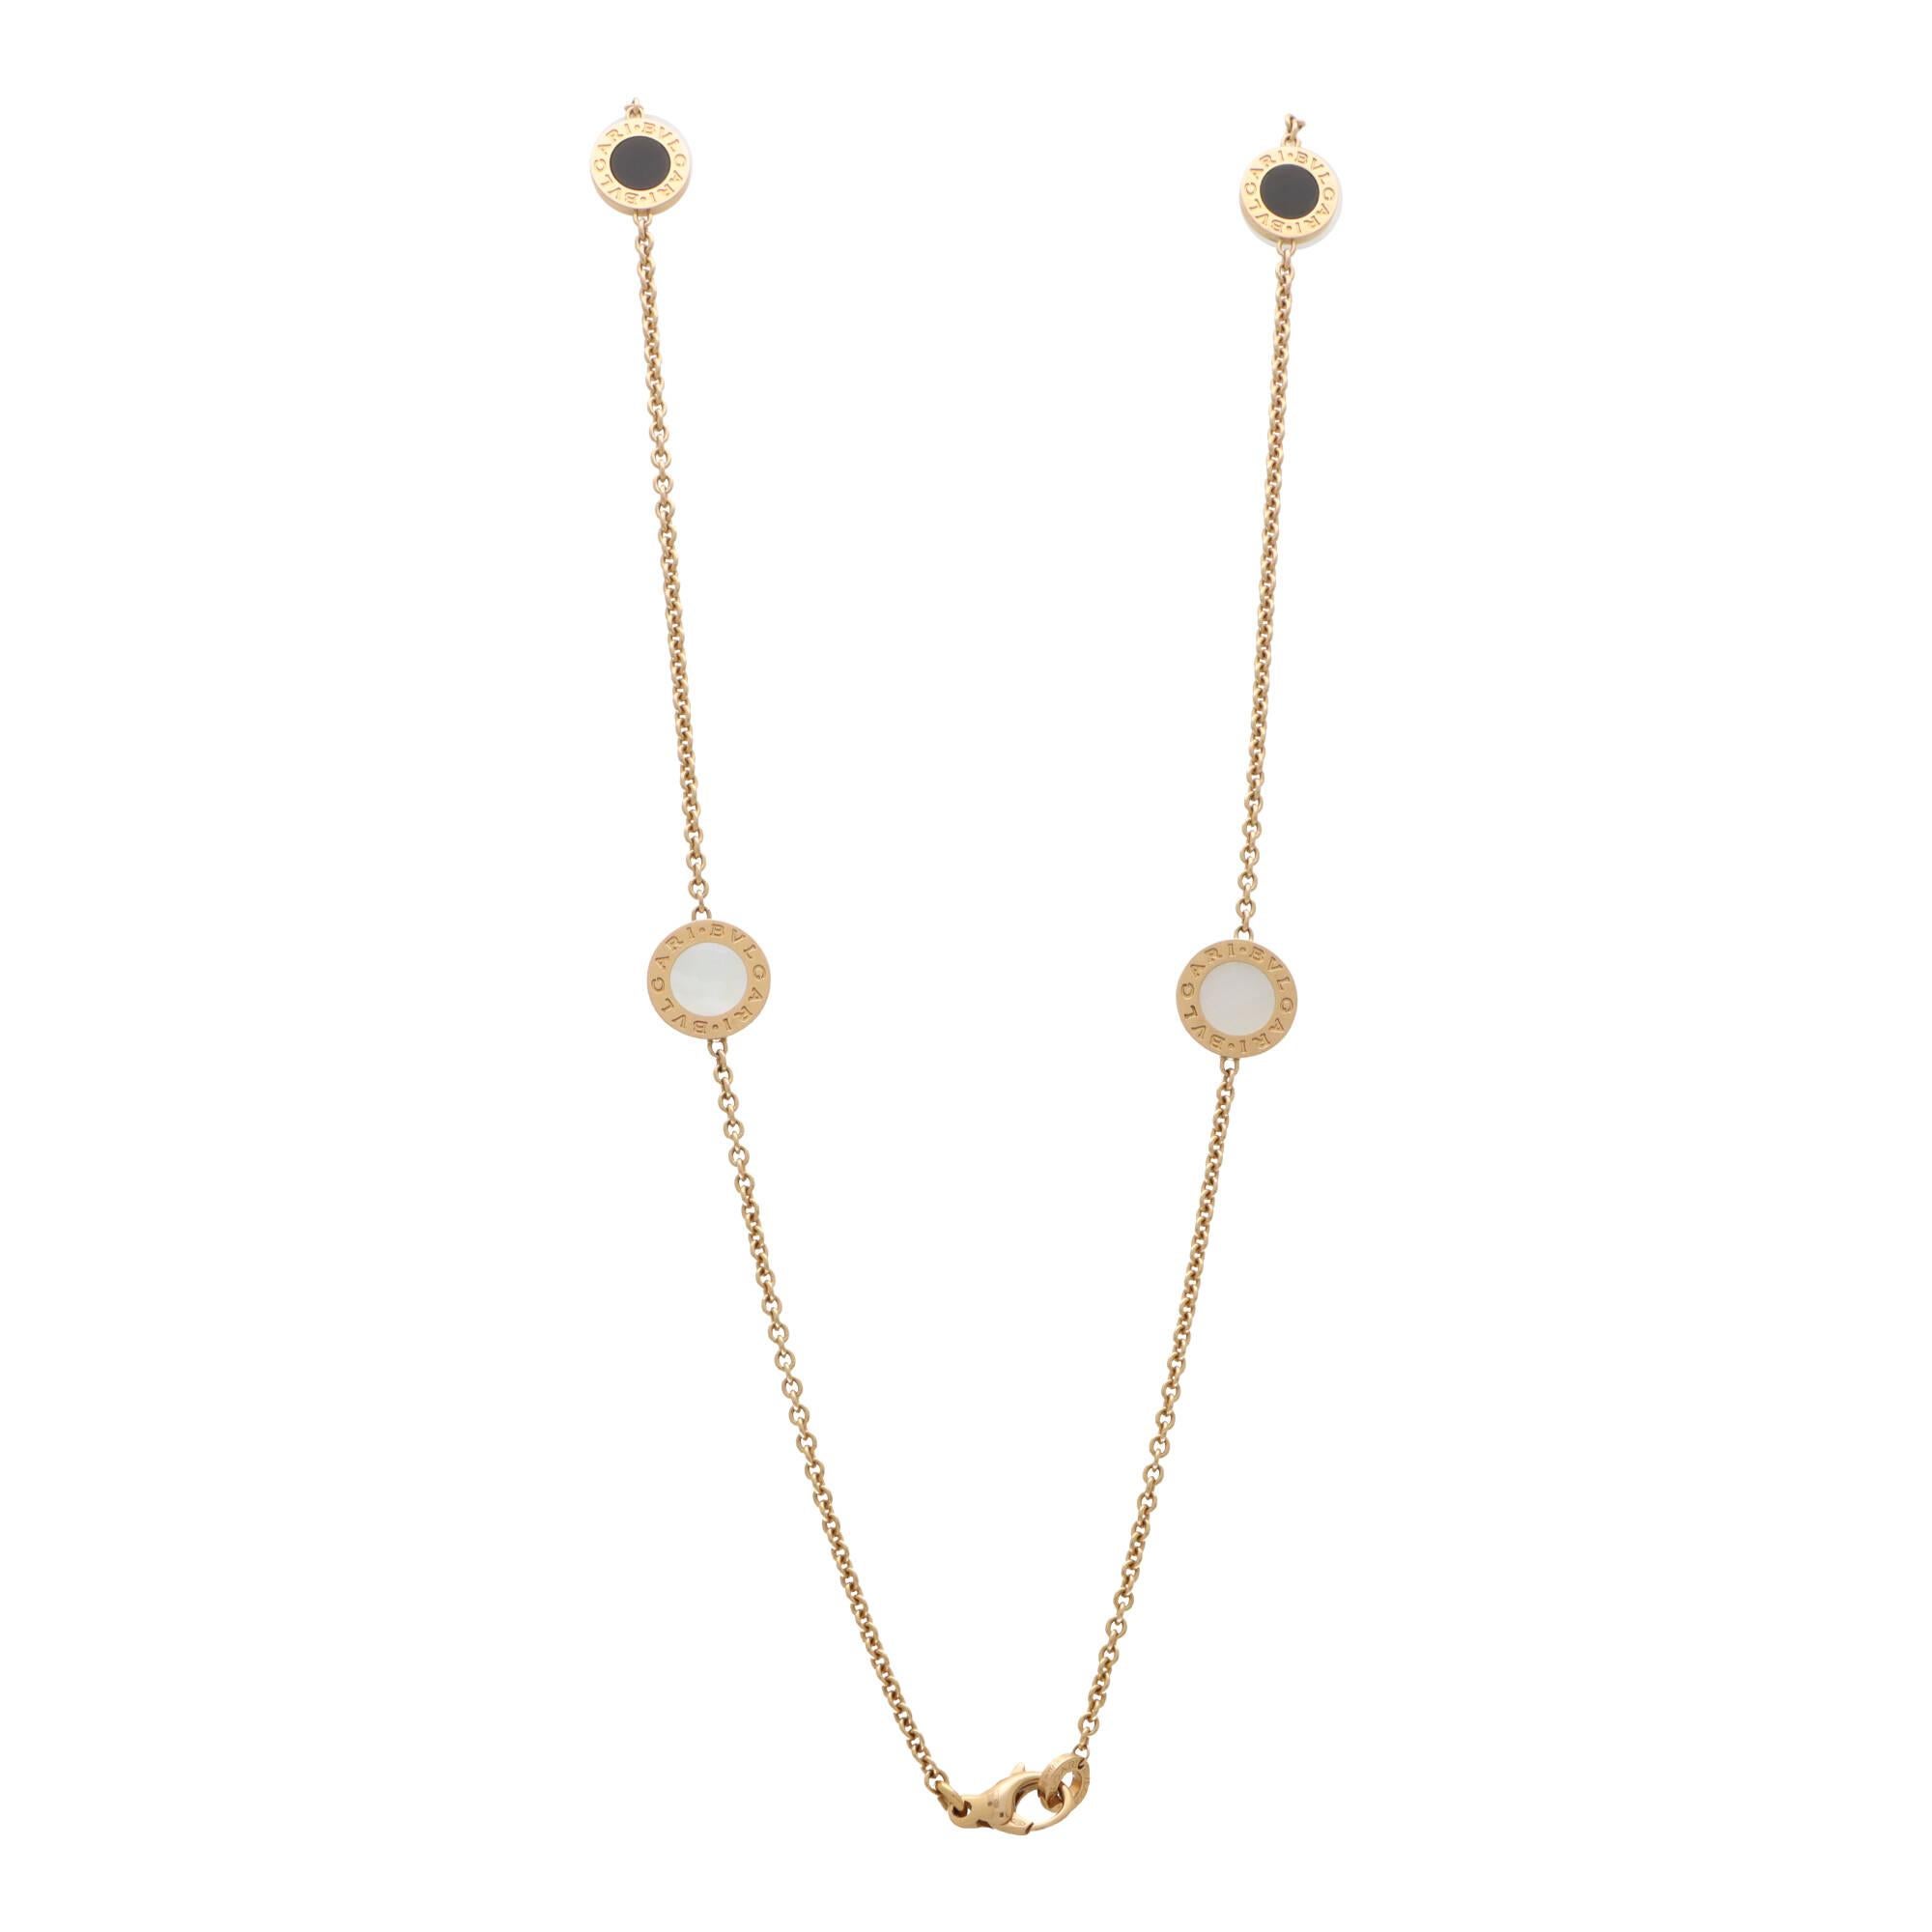 Mixed Cut Bvlgari Signature Mother of Pearl and Onyx Disc Necklace in 18k Rose Gold